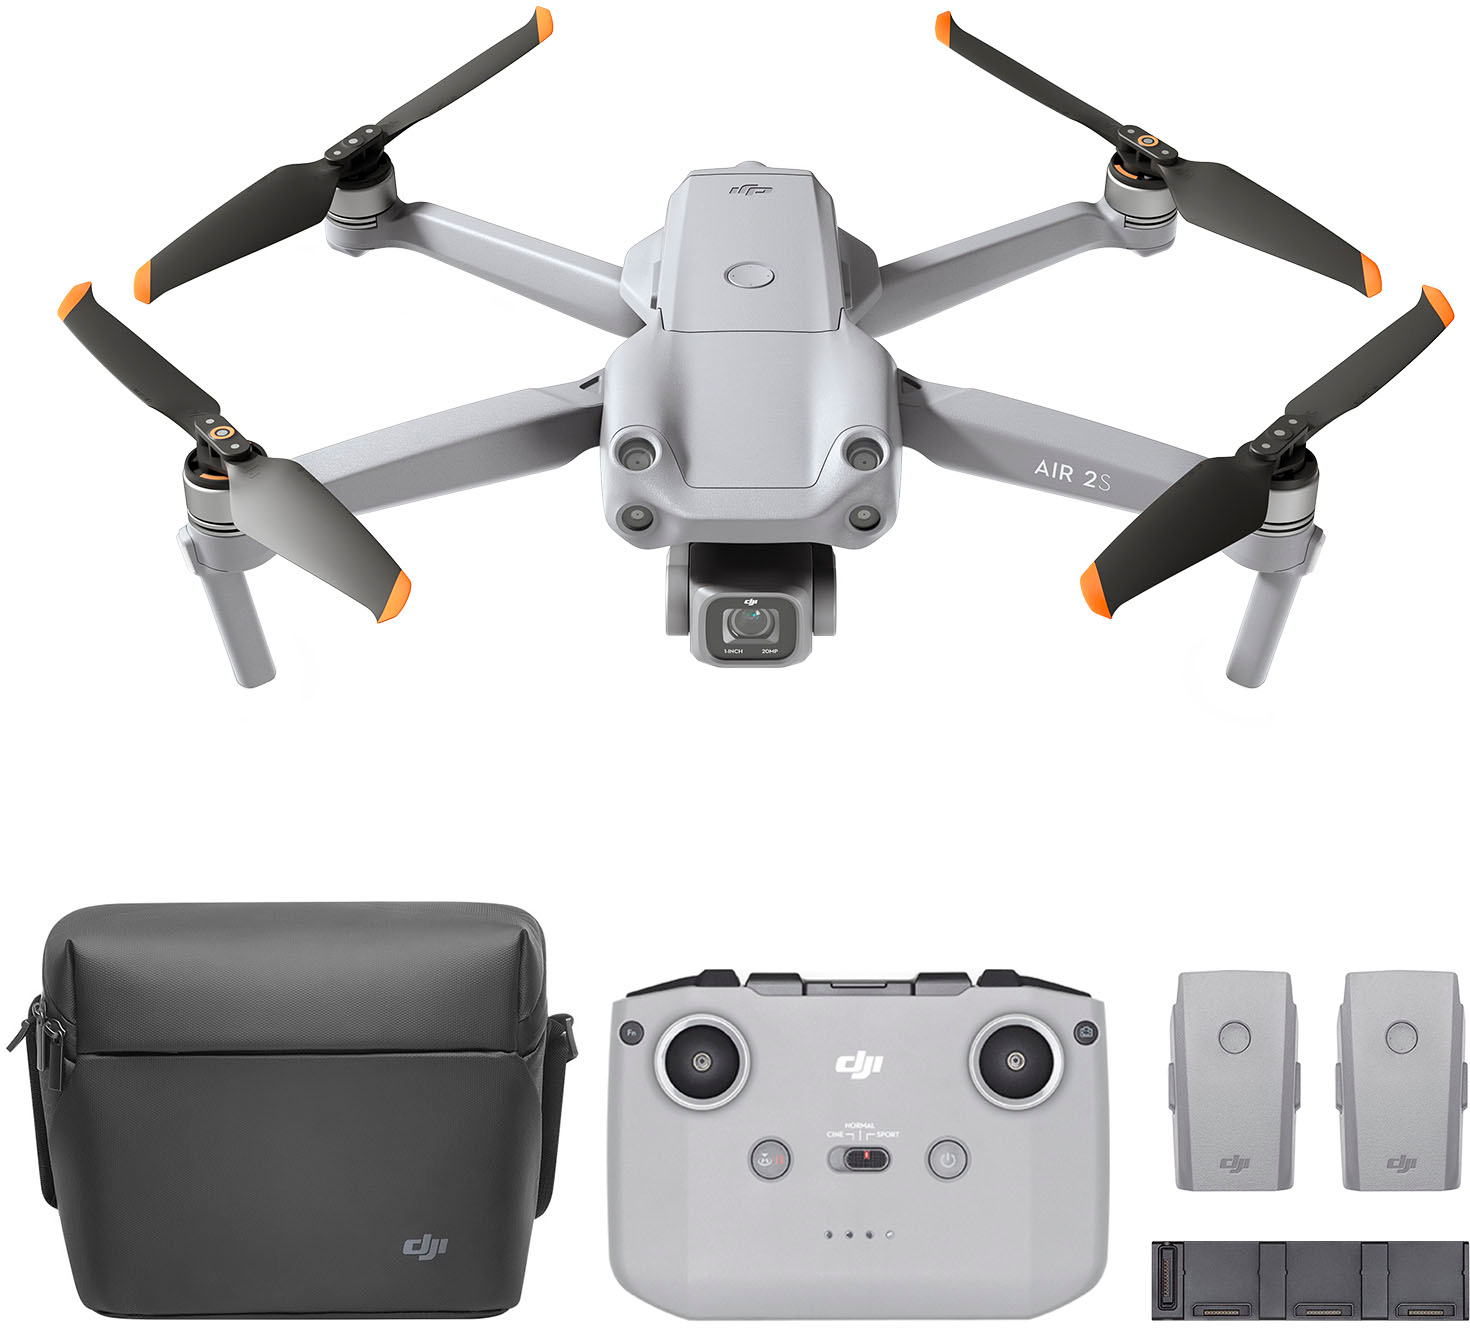 0190021036581 - DJI AIR 2S FLY MORE COMBO - DRONE WITH 3-AXIS GIMBAL CAMERA, 5.4K VIDEO, 1-INCH CMOS SENSOR, 4 DIRECTIONS OF OBSTACLE SENSING, 31-MIN FLIGHT TIME, MAX 7.5-MILE VIDEO TRANSMISSION, MASTERSHOTS, GRAY